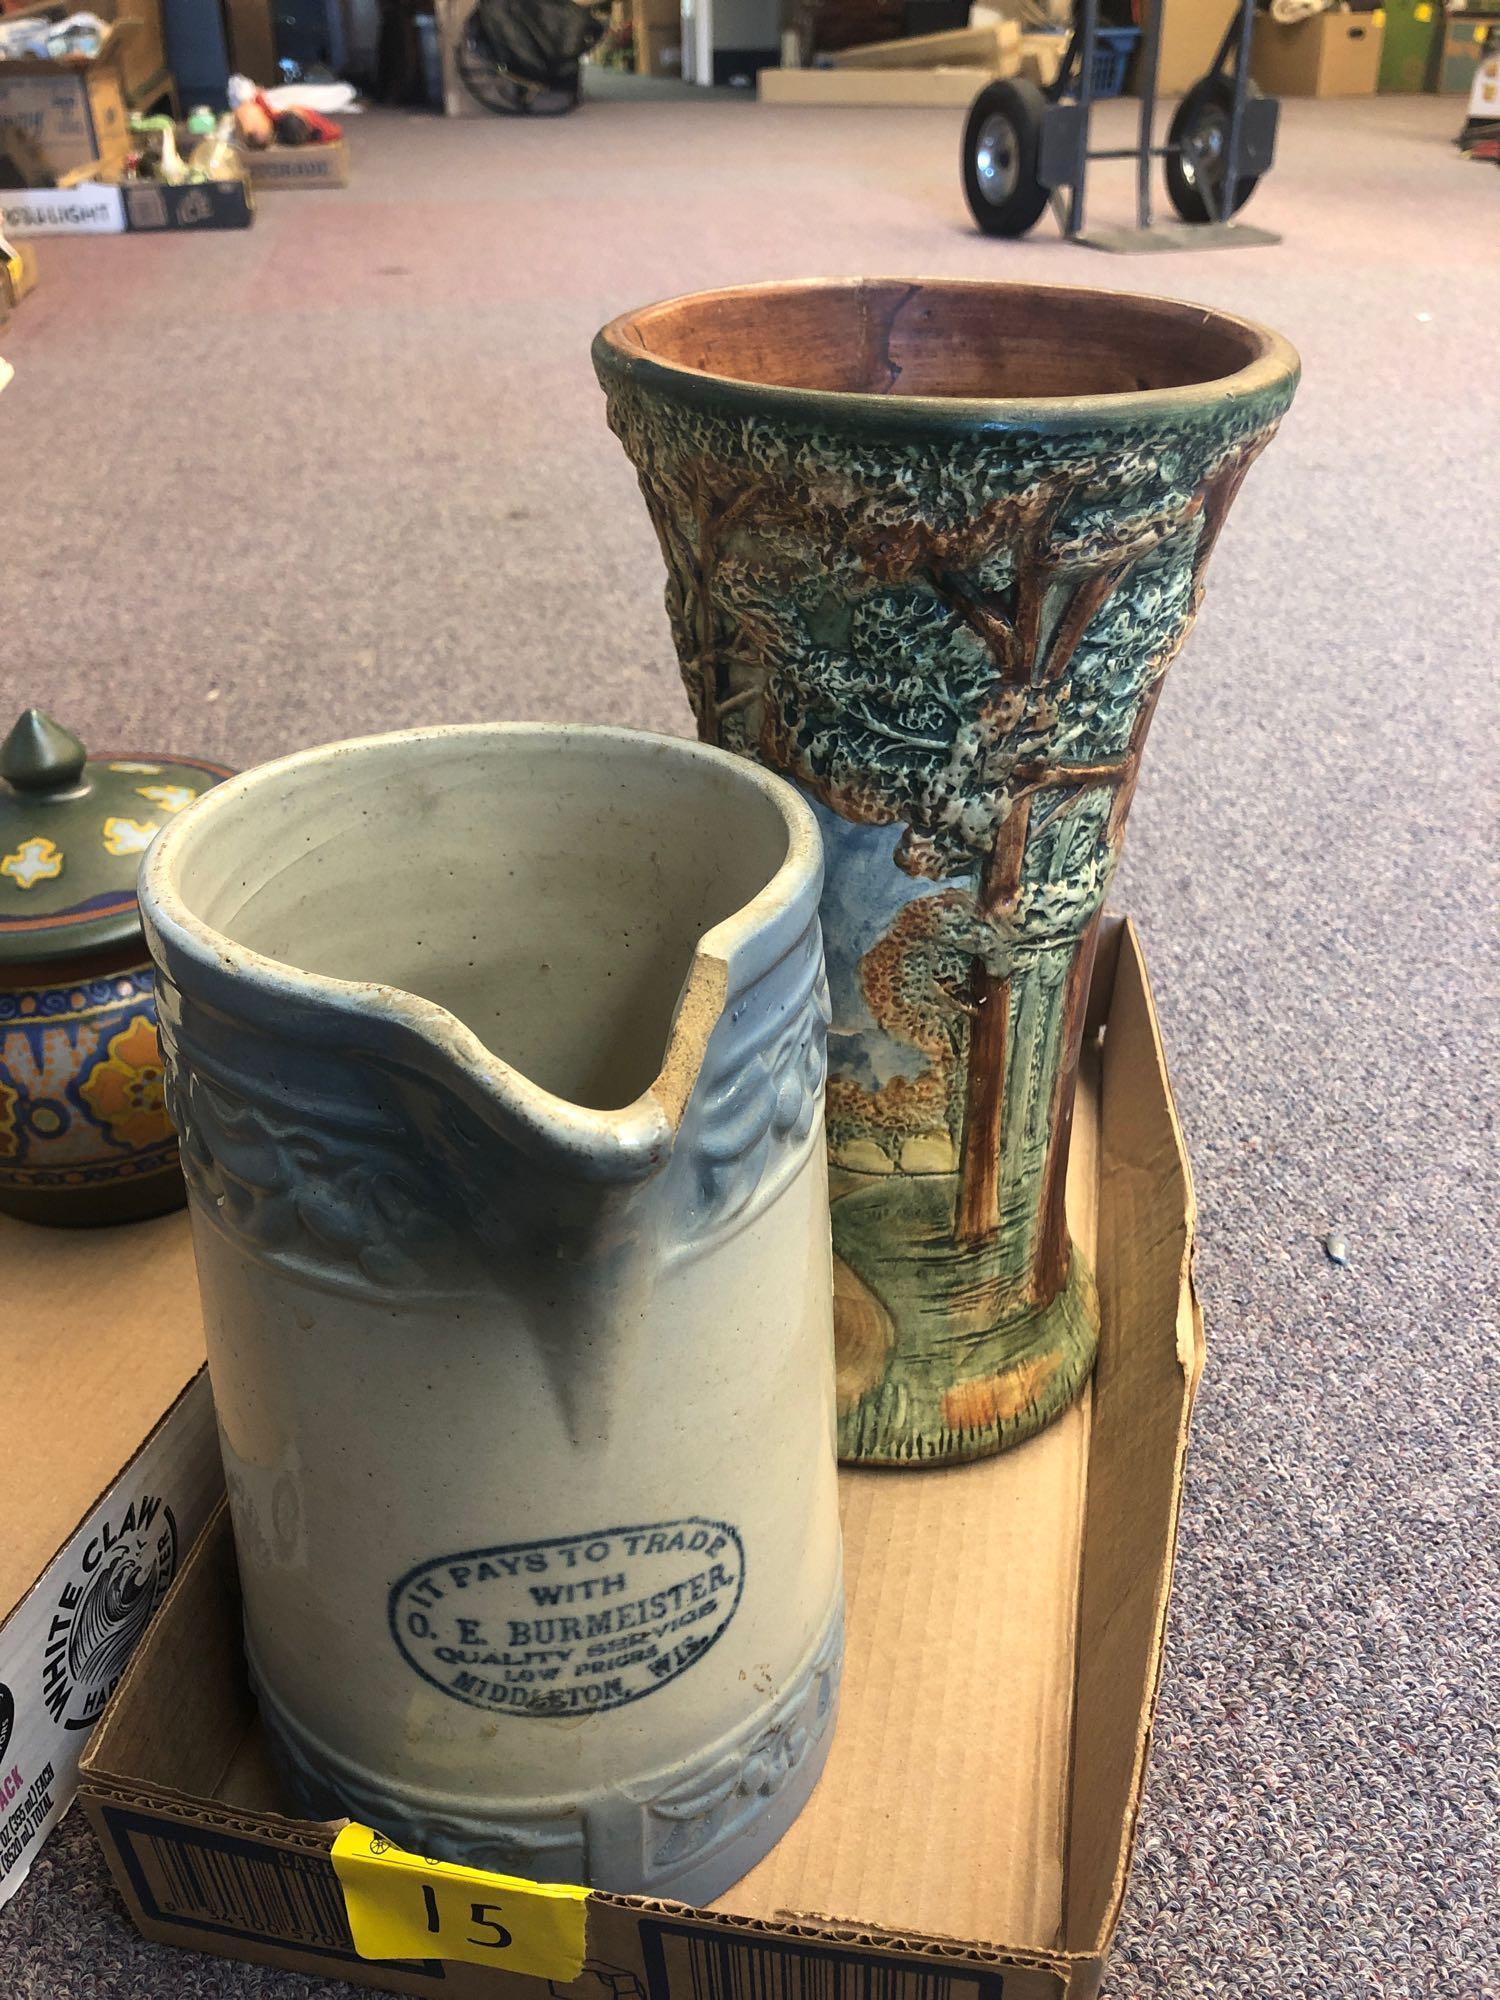 2 flats pottery vases, pitchers, etc, most is chipped or cracked or repaired